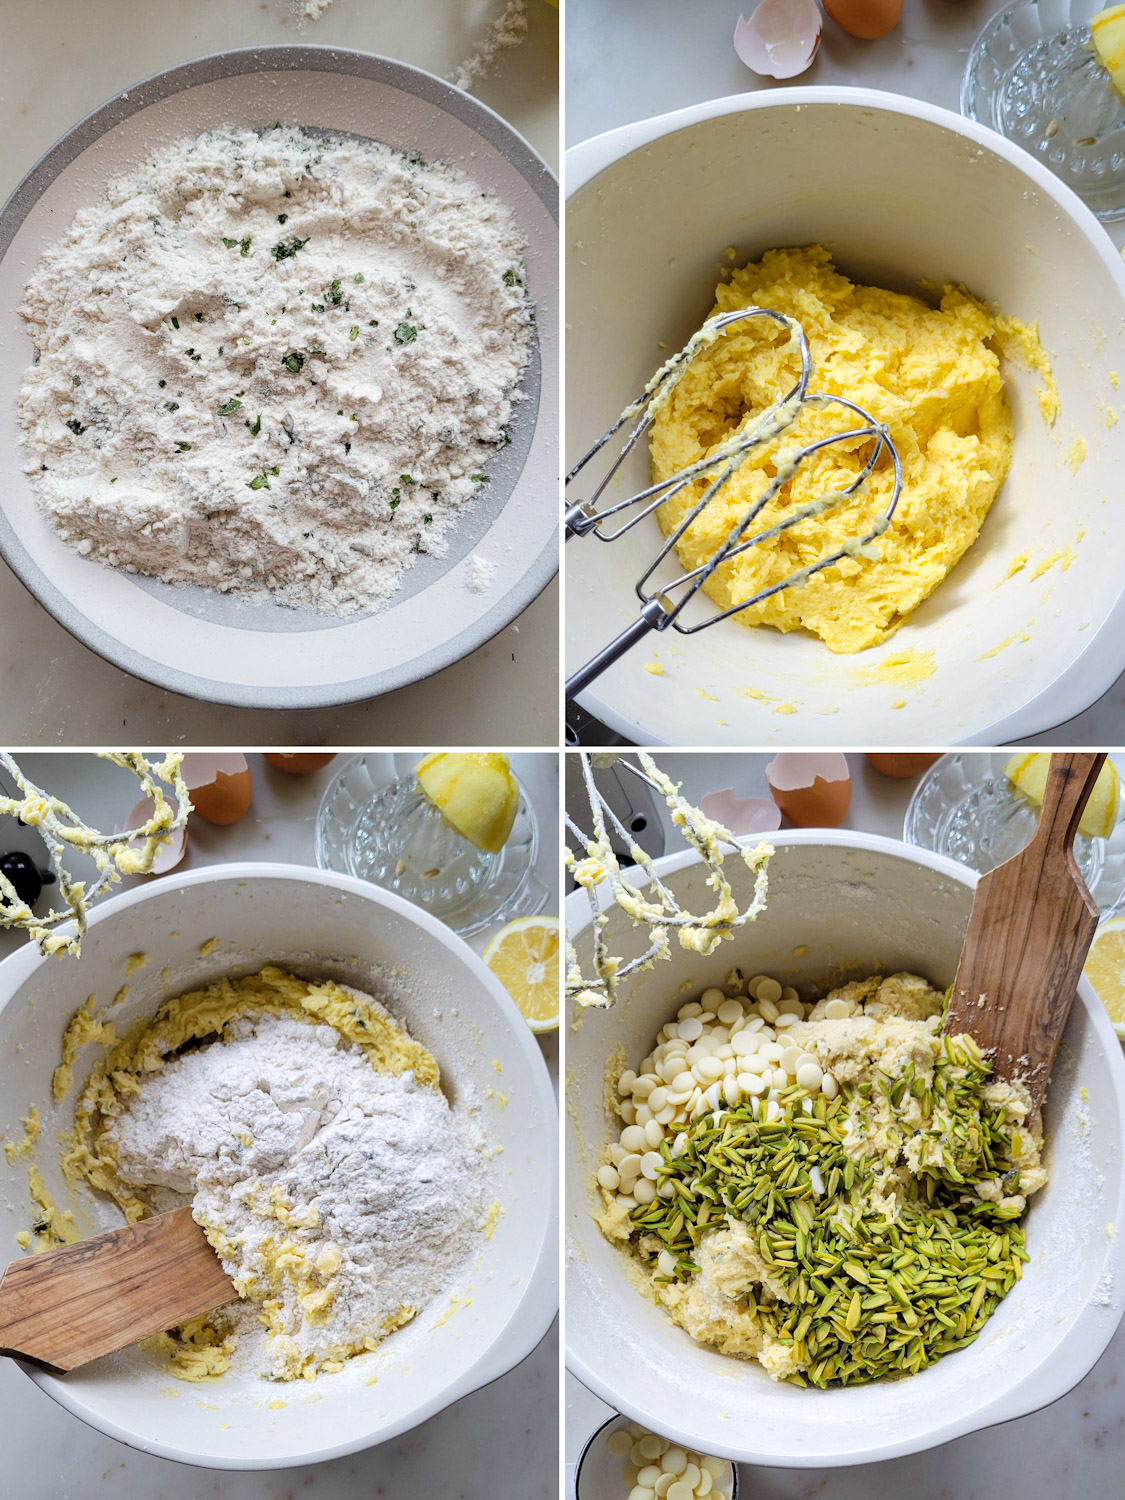 Collage showing the making of the cookie dough for Lemon Basil Cookies with White Chocolate and Pistachios